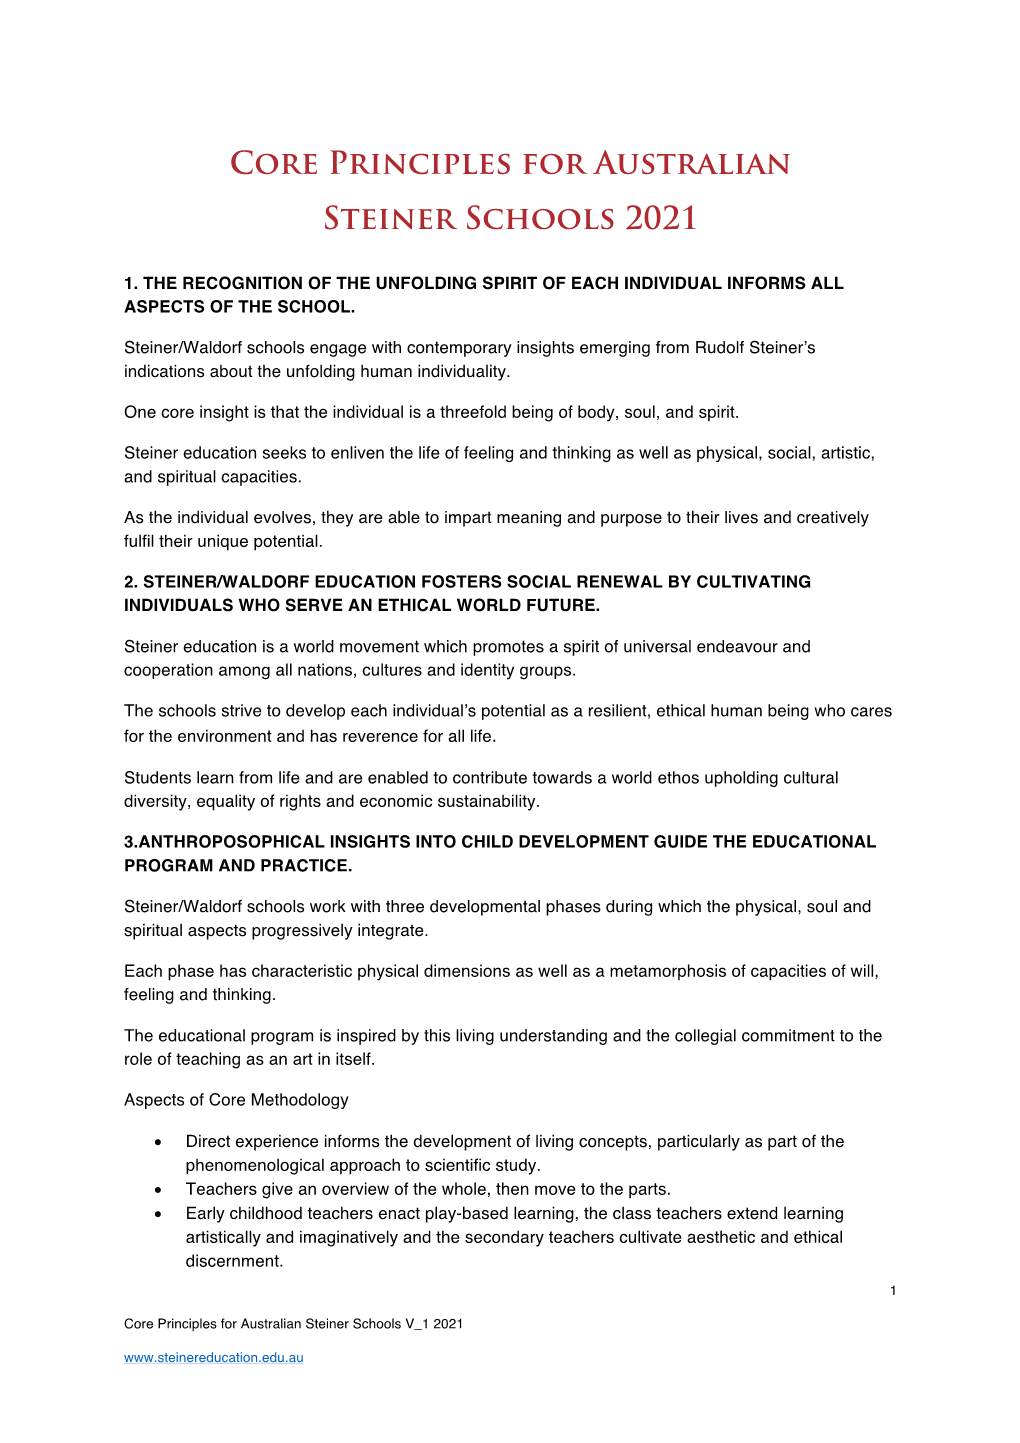 Core Principles for Australian Steiner Schools V 1 2021 • Goodness, Beauty and Truth Are Ideals That Are Embedded Within the Education